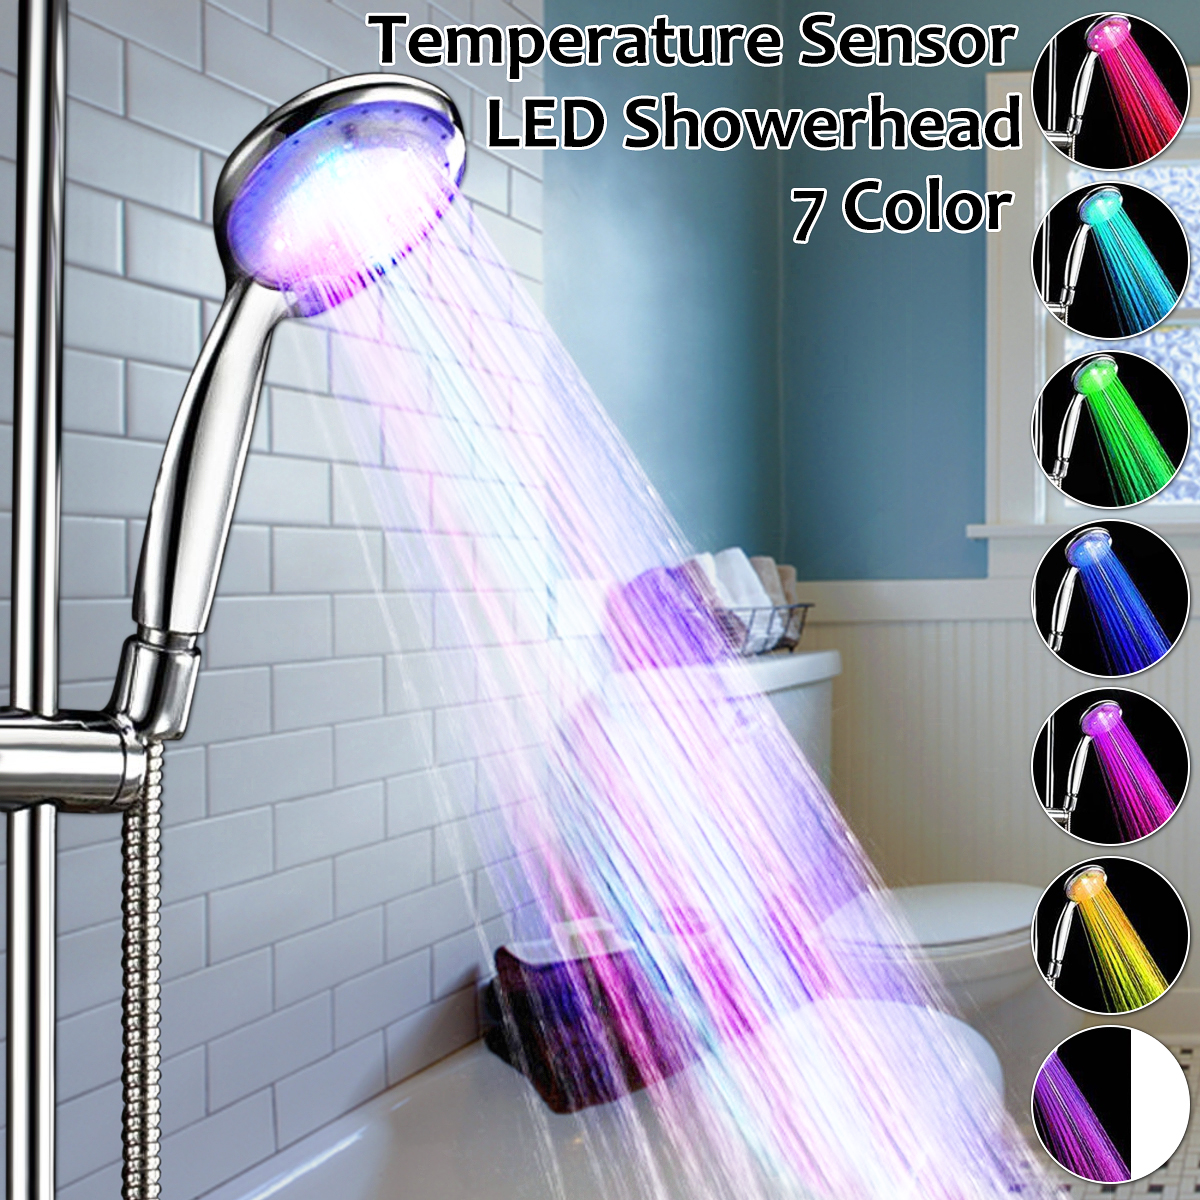 Chrome-Bathroom-Handheld-ABS-LED-Shower-Head-7-Color-Changing-Water-Glow-Light-1442625-1